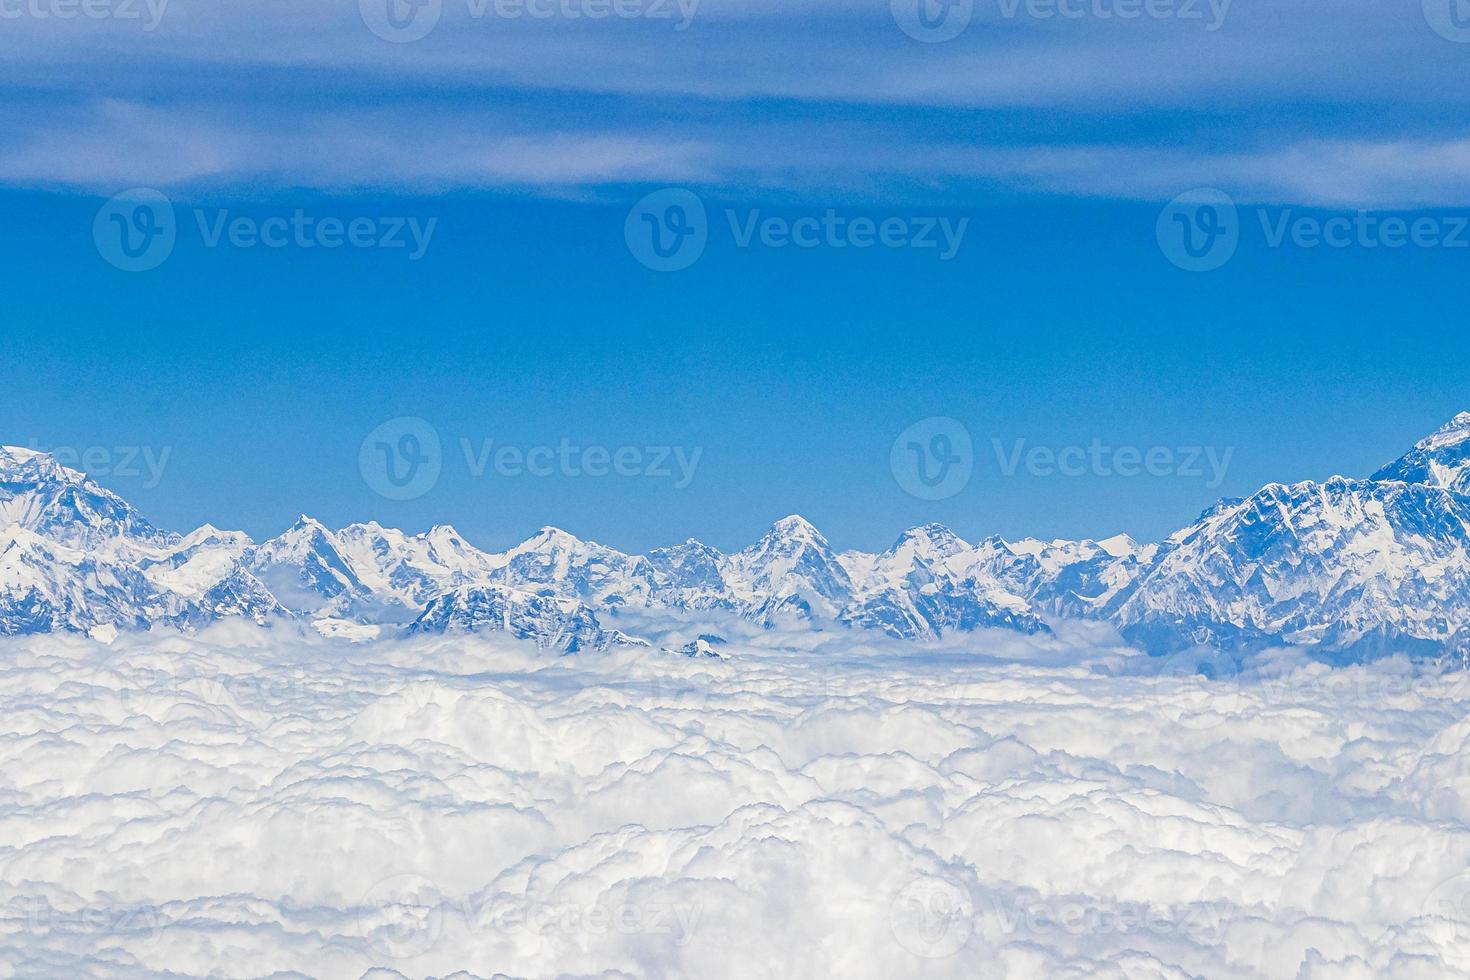 The Himalayas in Nepal photo